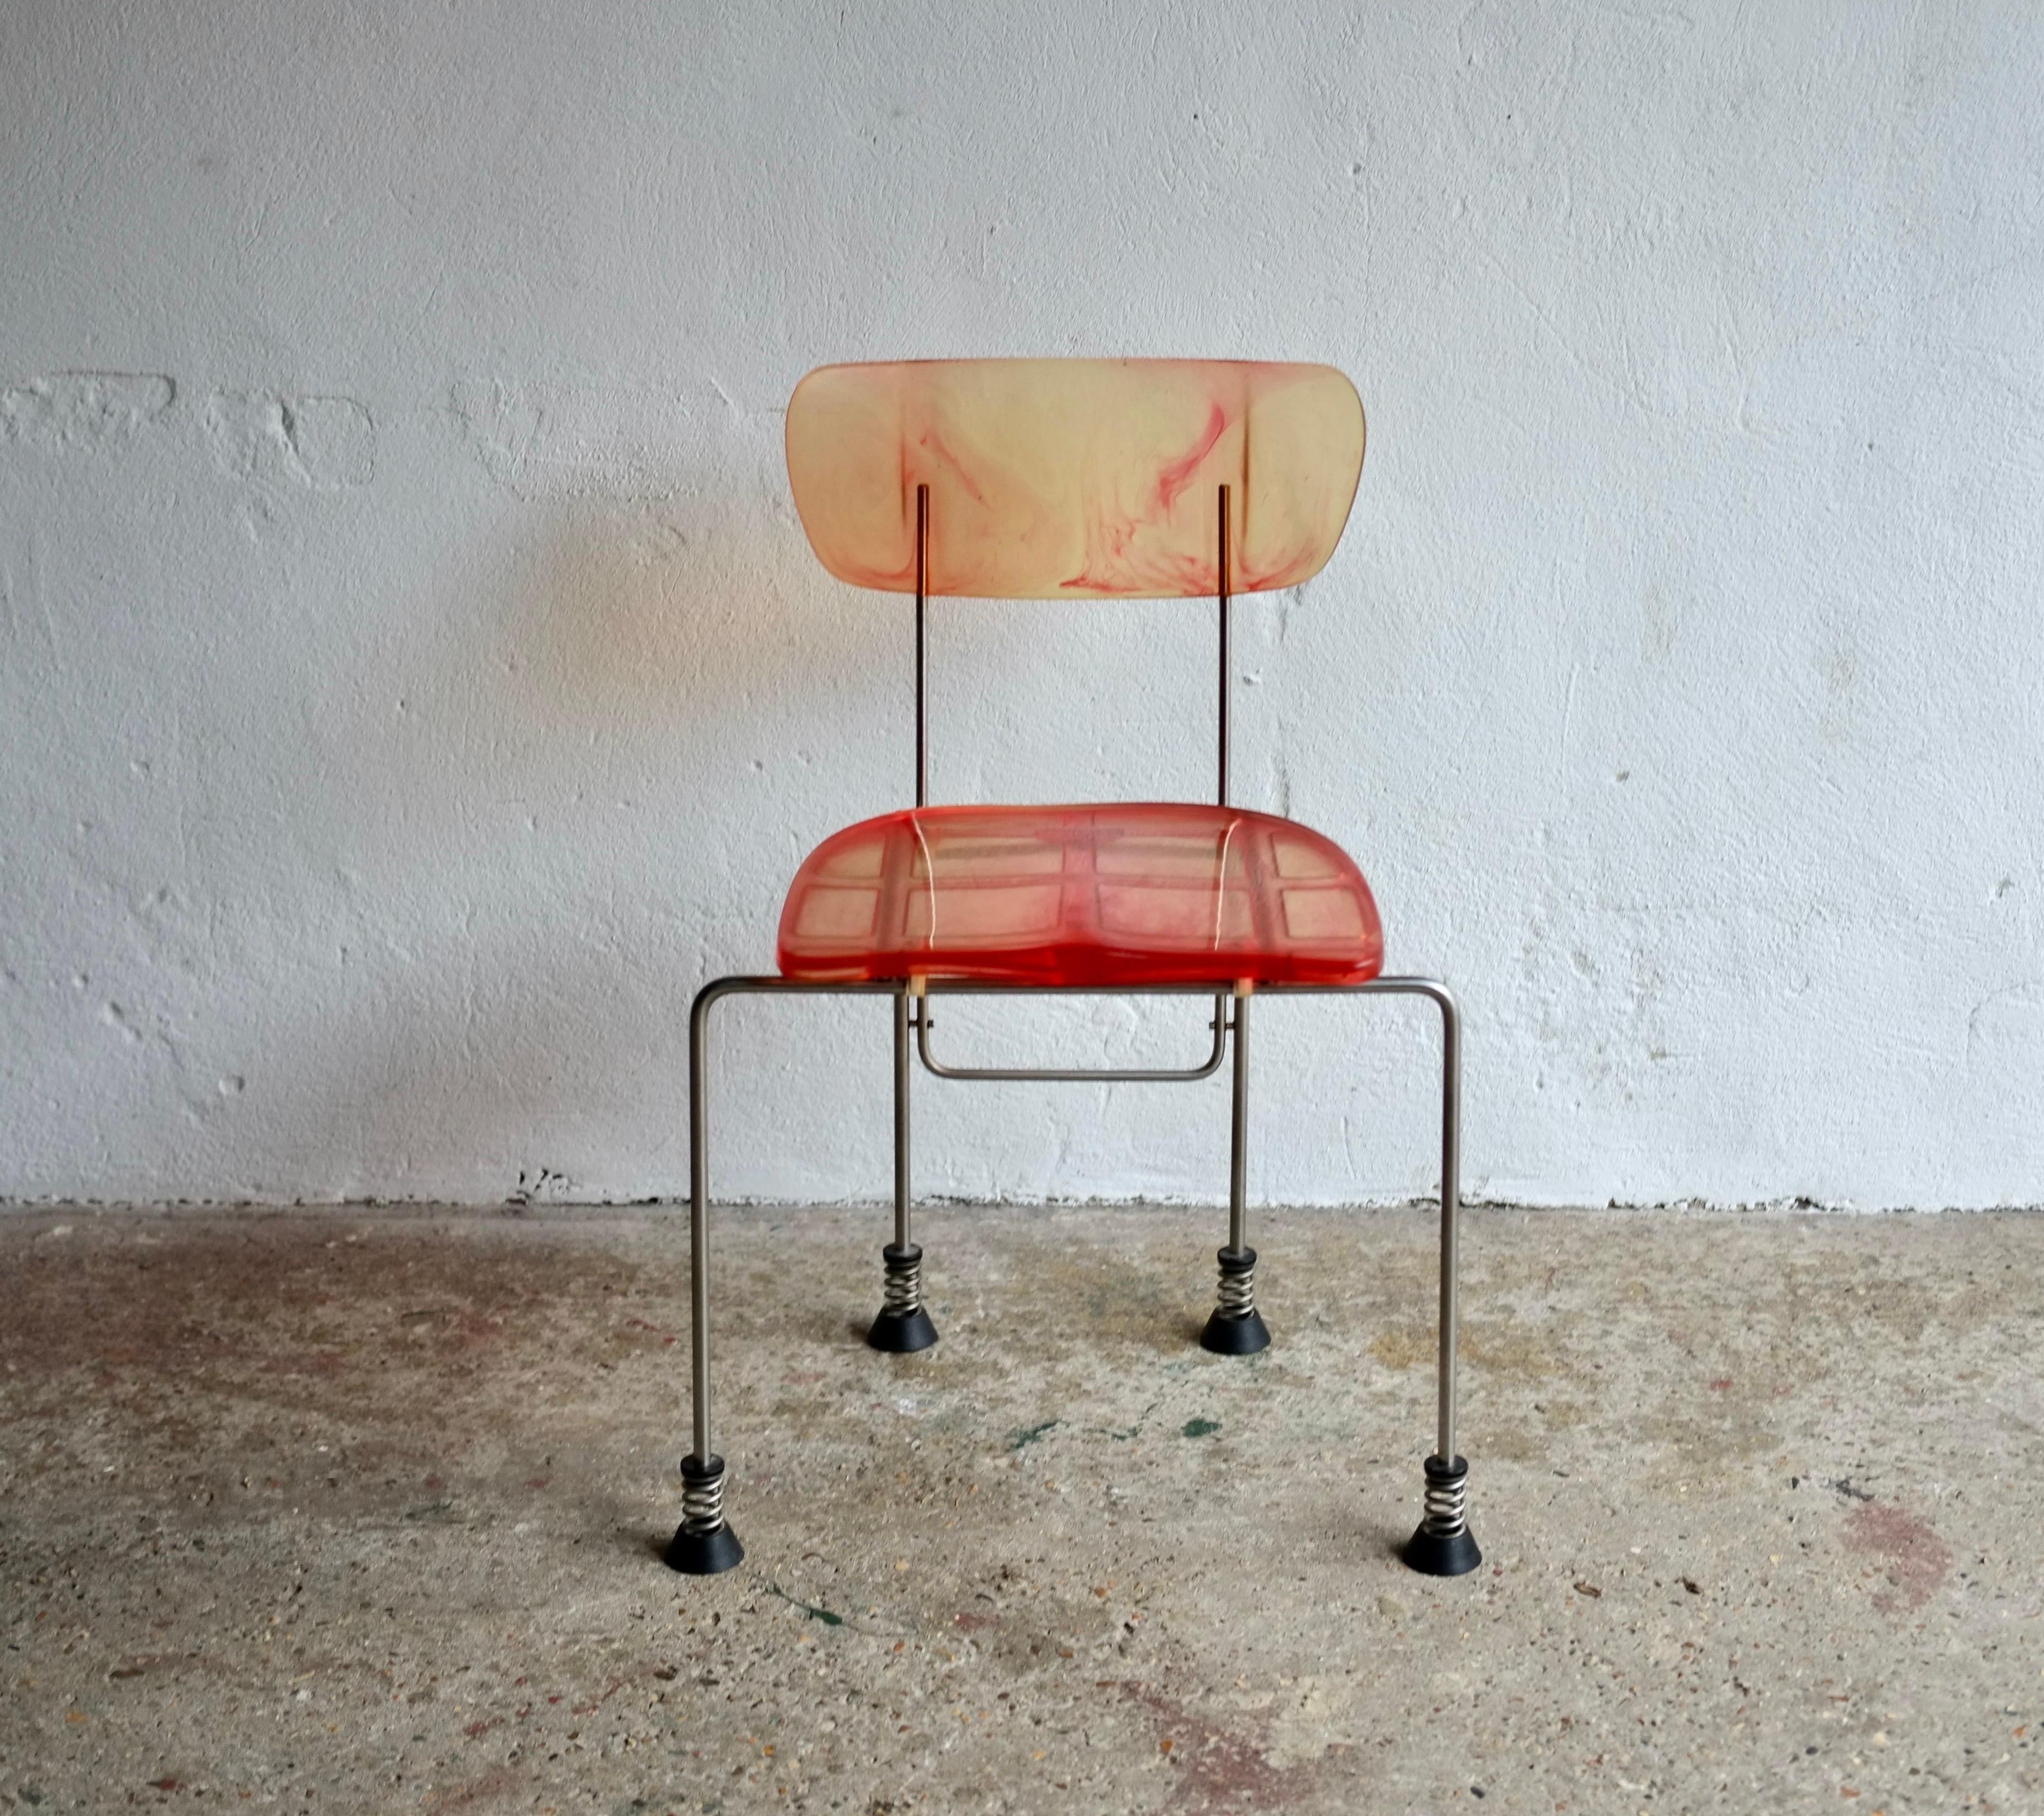 Broadway chair designed by Gaetano Pesce for Bernini, 1993.

Orange/red toned resin moulded plastic with brushed steel legs.

In very good vintage condition with no damage or missing parts.